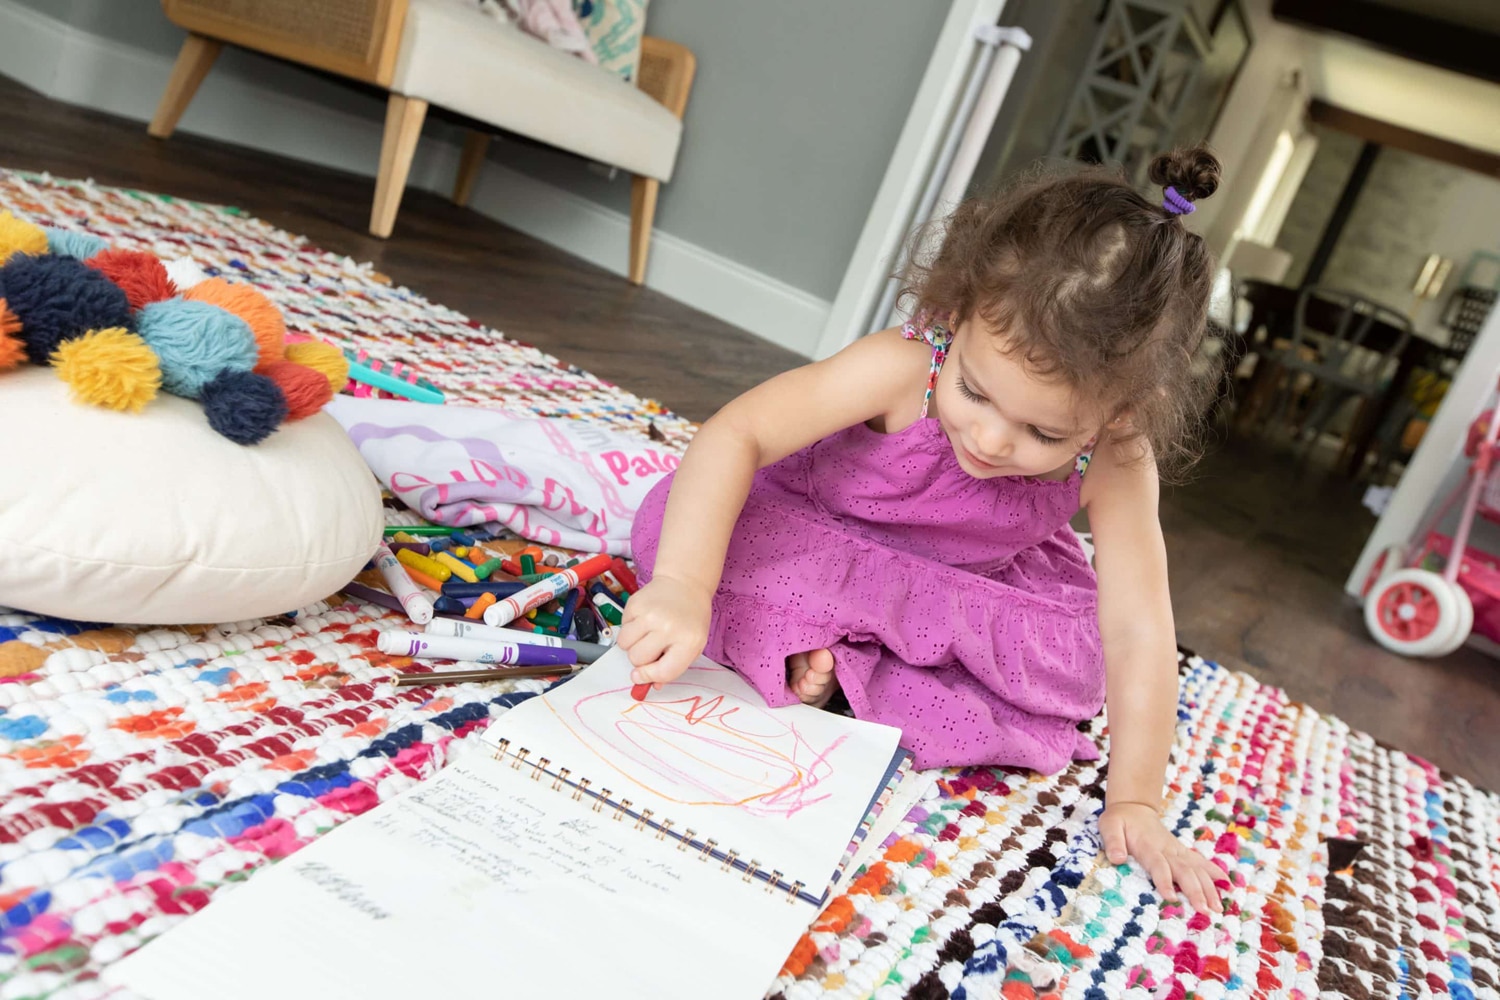 A little girl colors on a colorful rug.